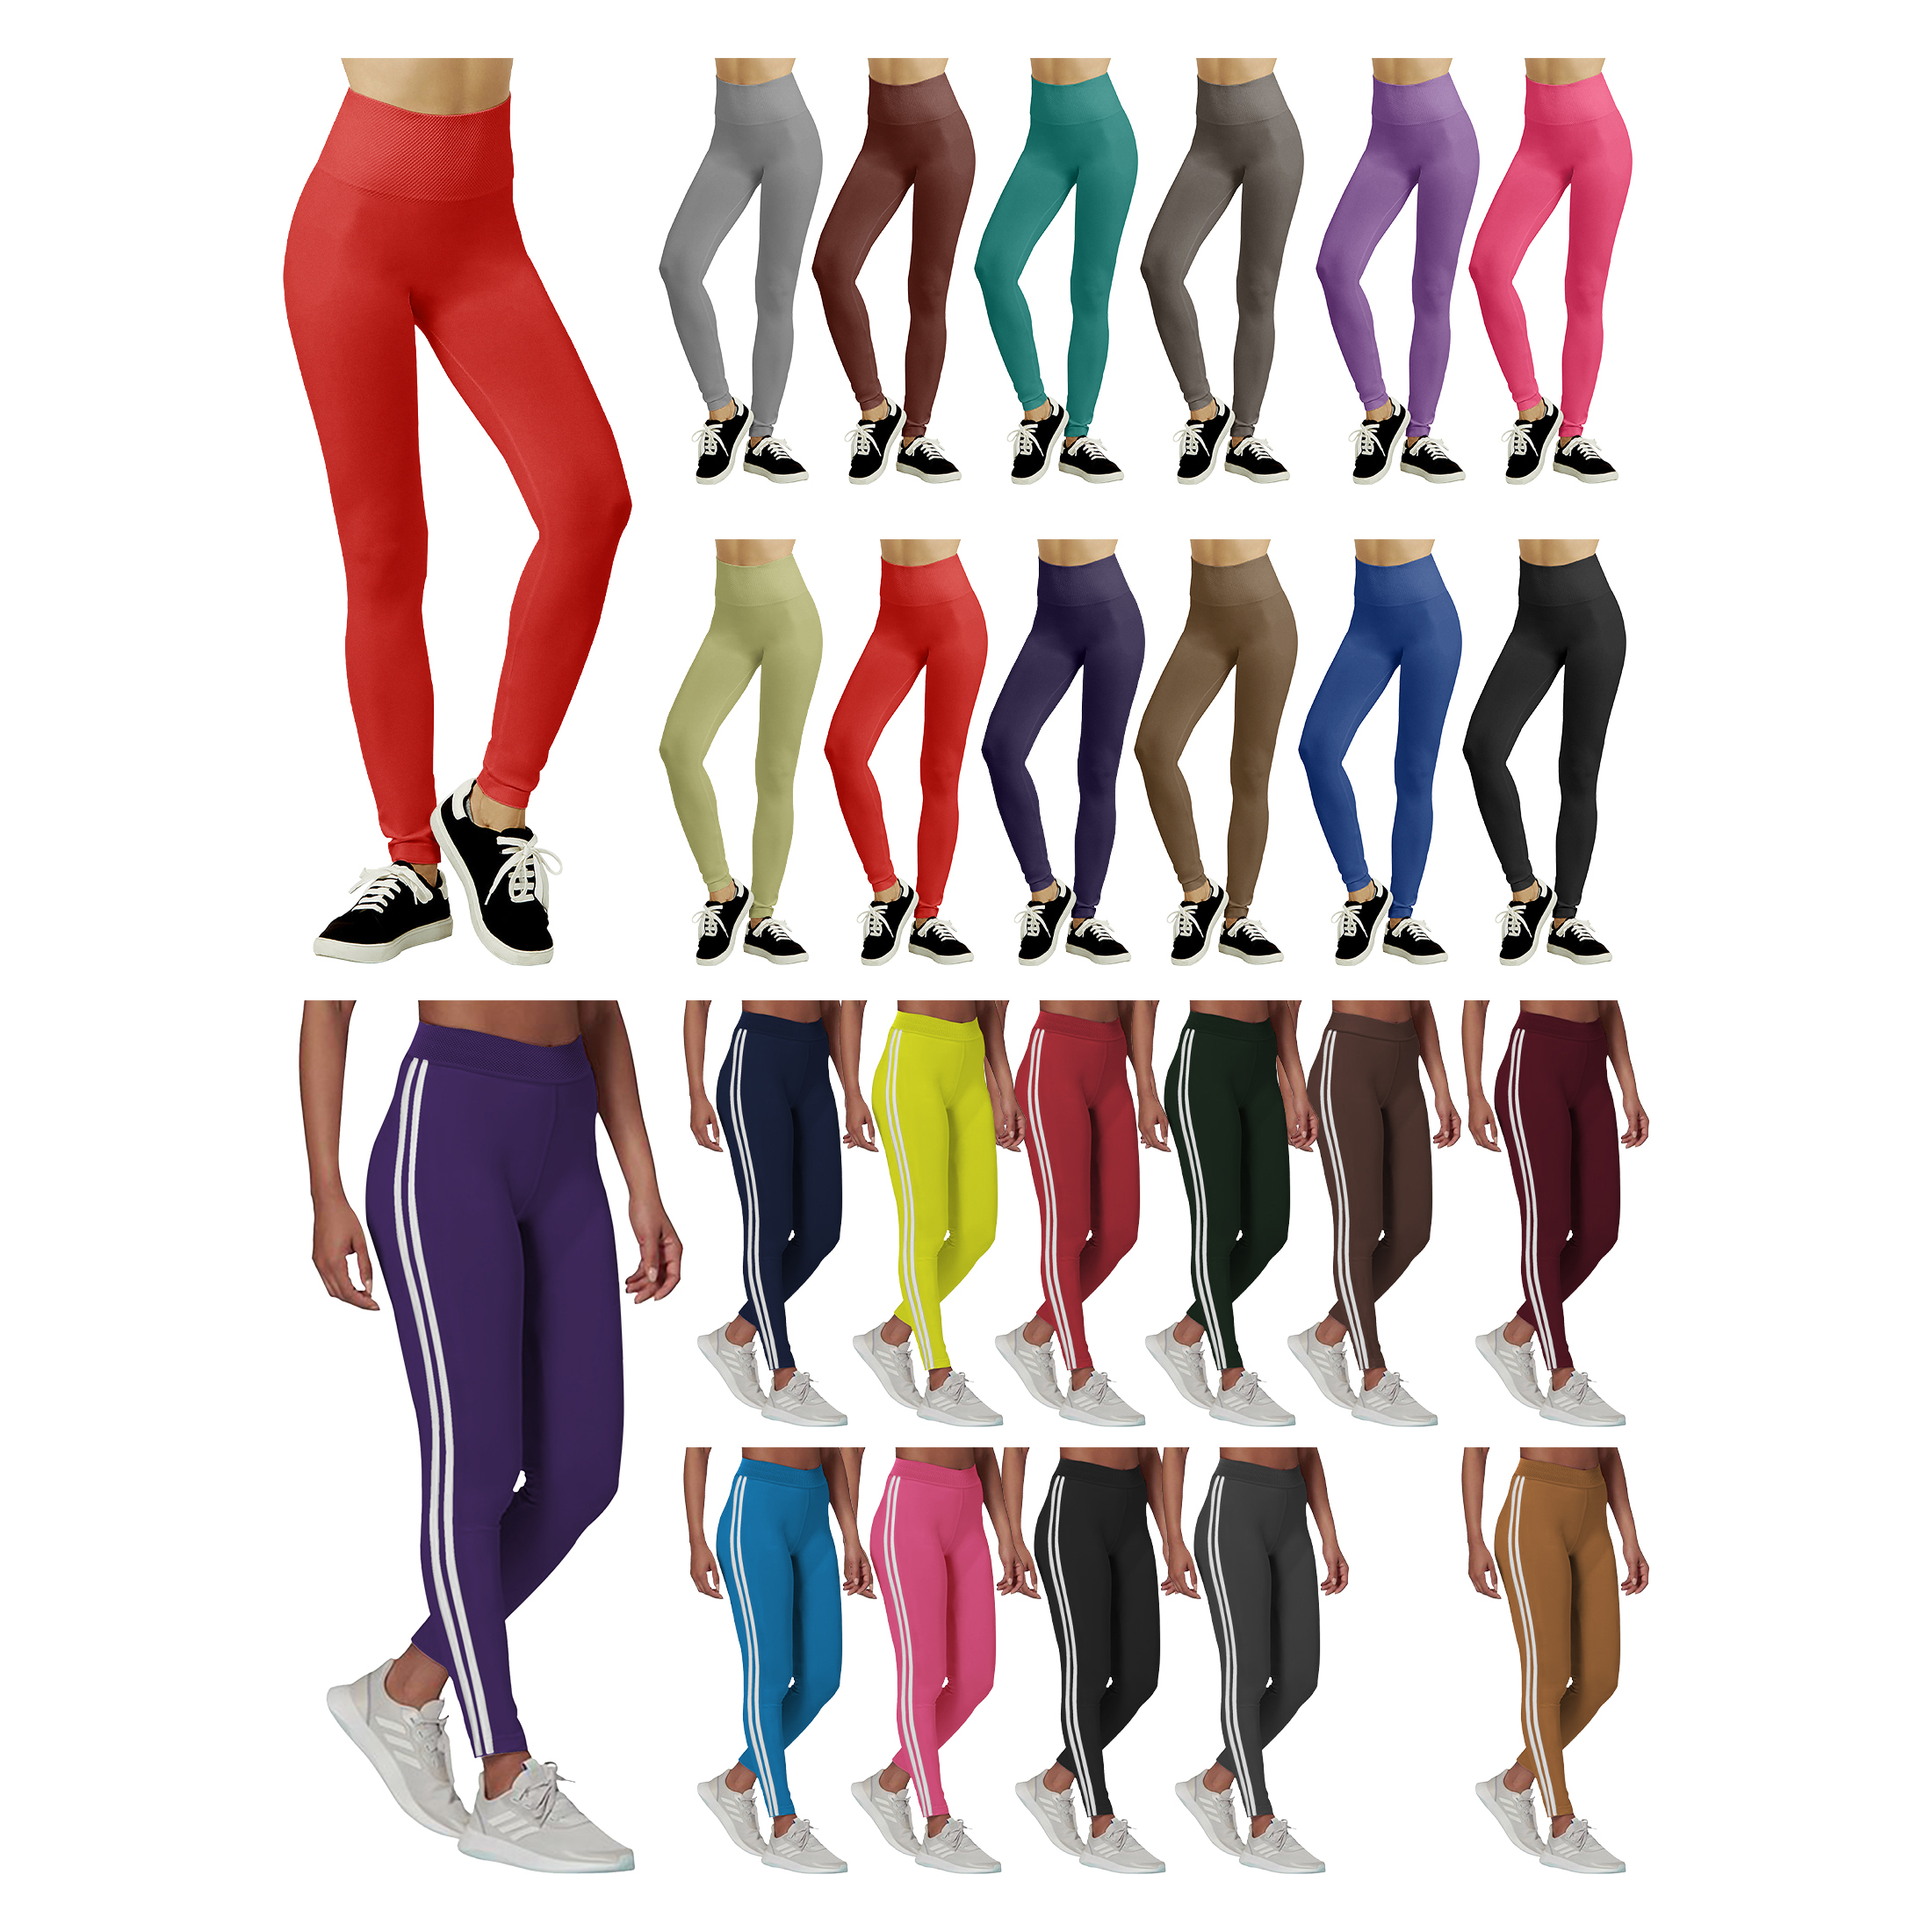 2-Pack: Women's Fleece-Lined High Waisted Workout Yoga Leggings - Striped, Large/X-Large